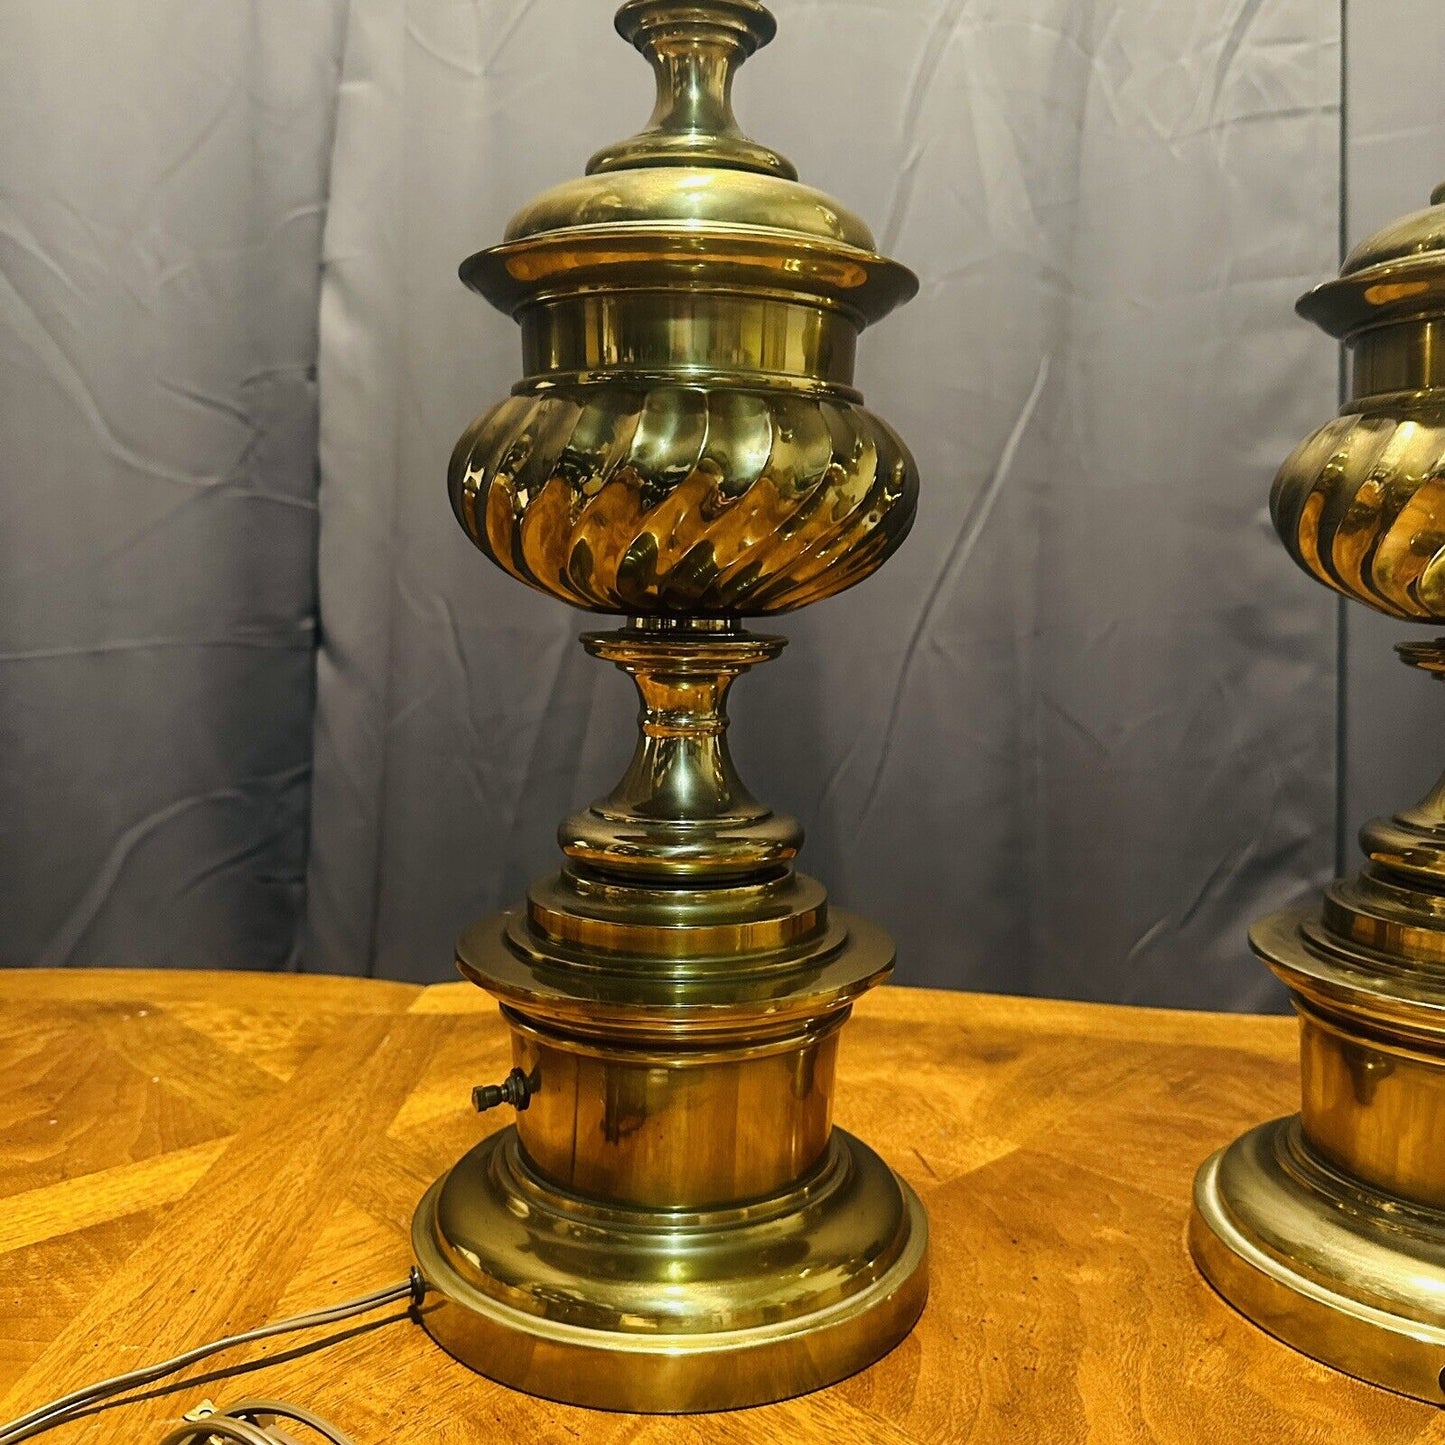 Hollywood Regency Stiffel Solid Brass Table Lamp 33” H USA Made Vintage 2 Pieces